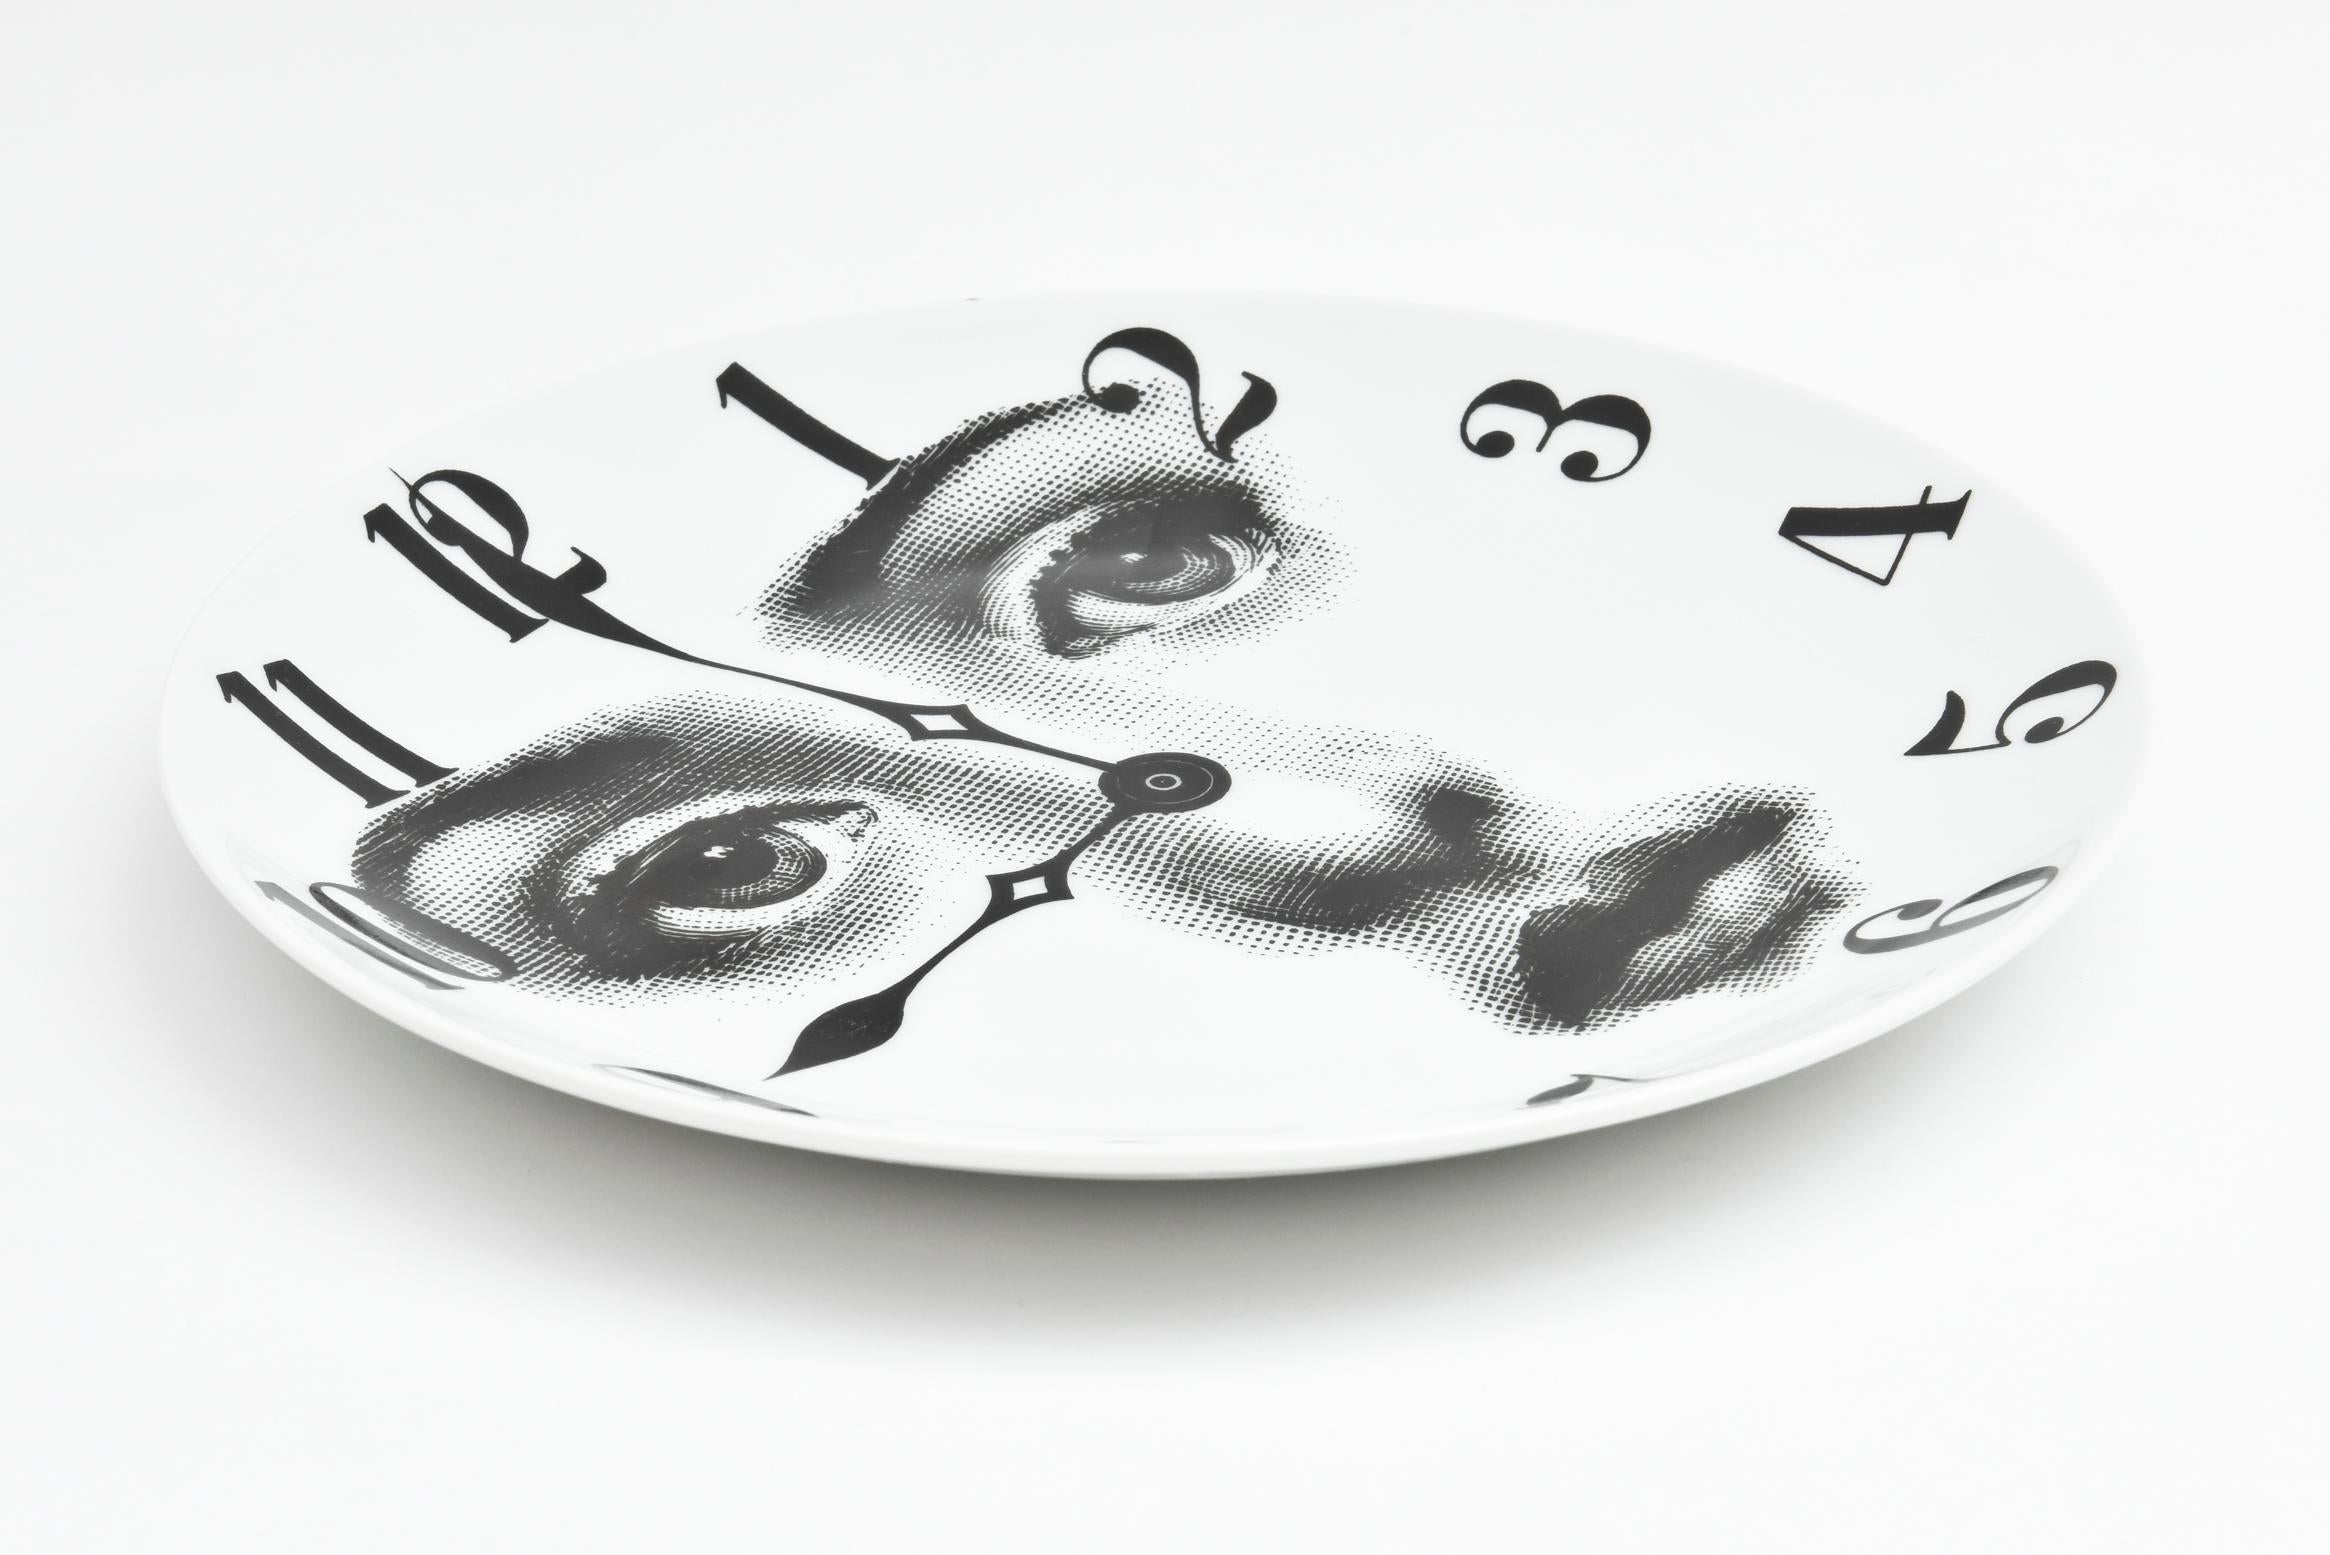 Italian Vintage Piero Fornasetti Display Plate, Barney's New York Collection For Sale